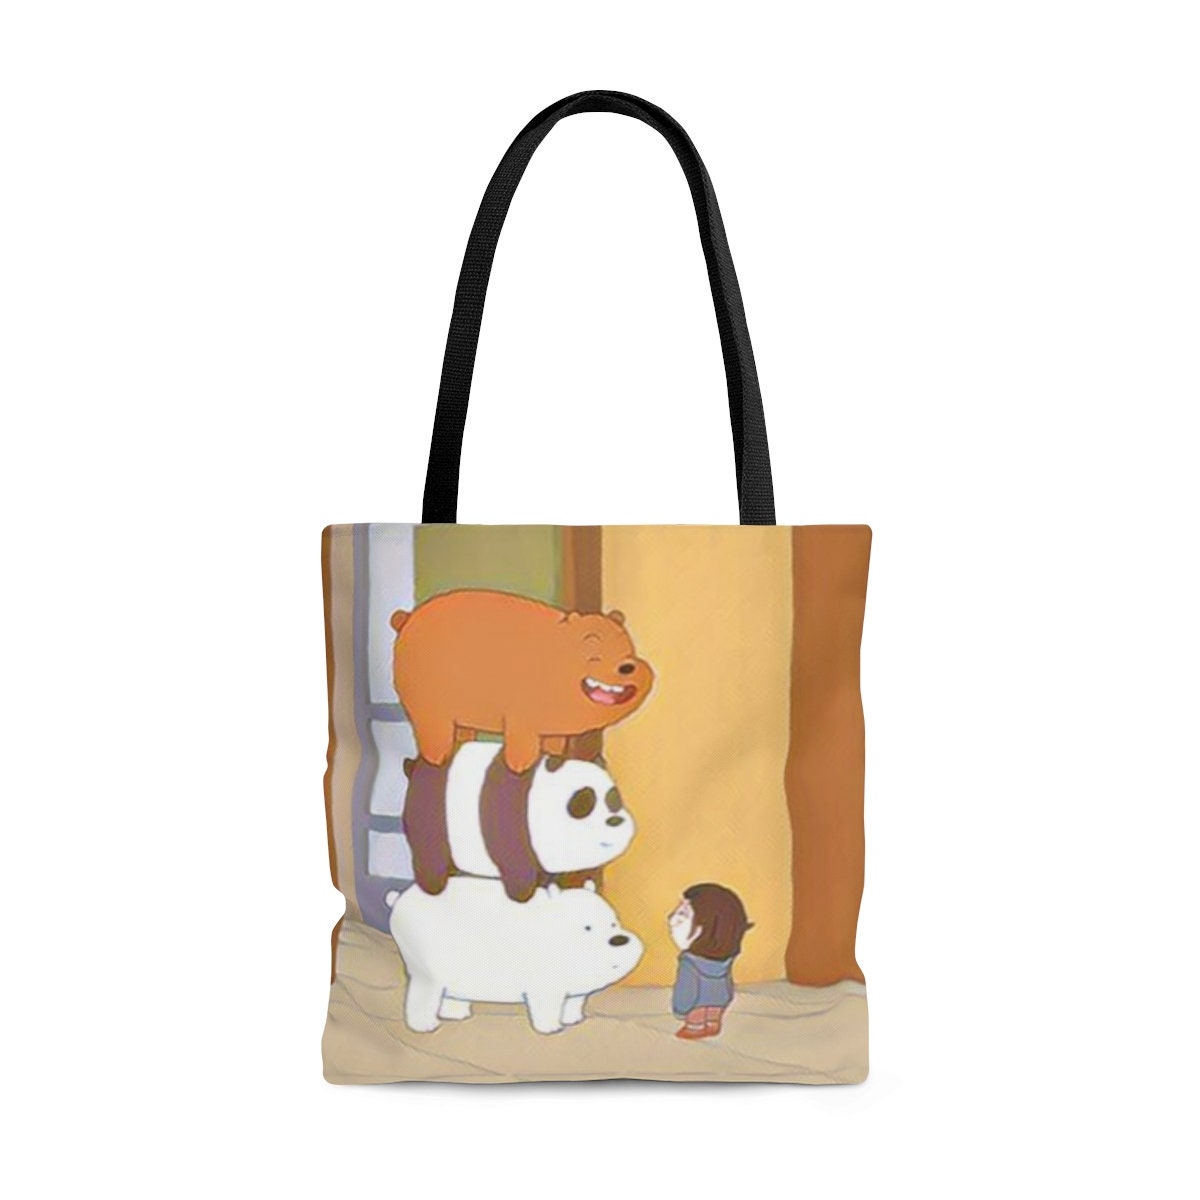 These 'We Bare Bears' Tote Bags are way too cute and cost only S